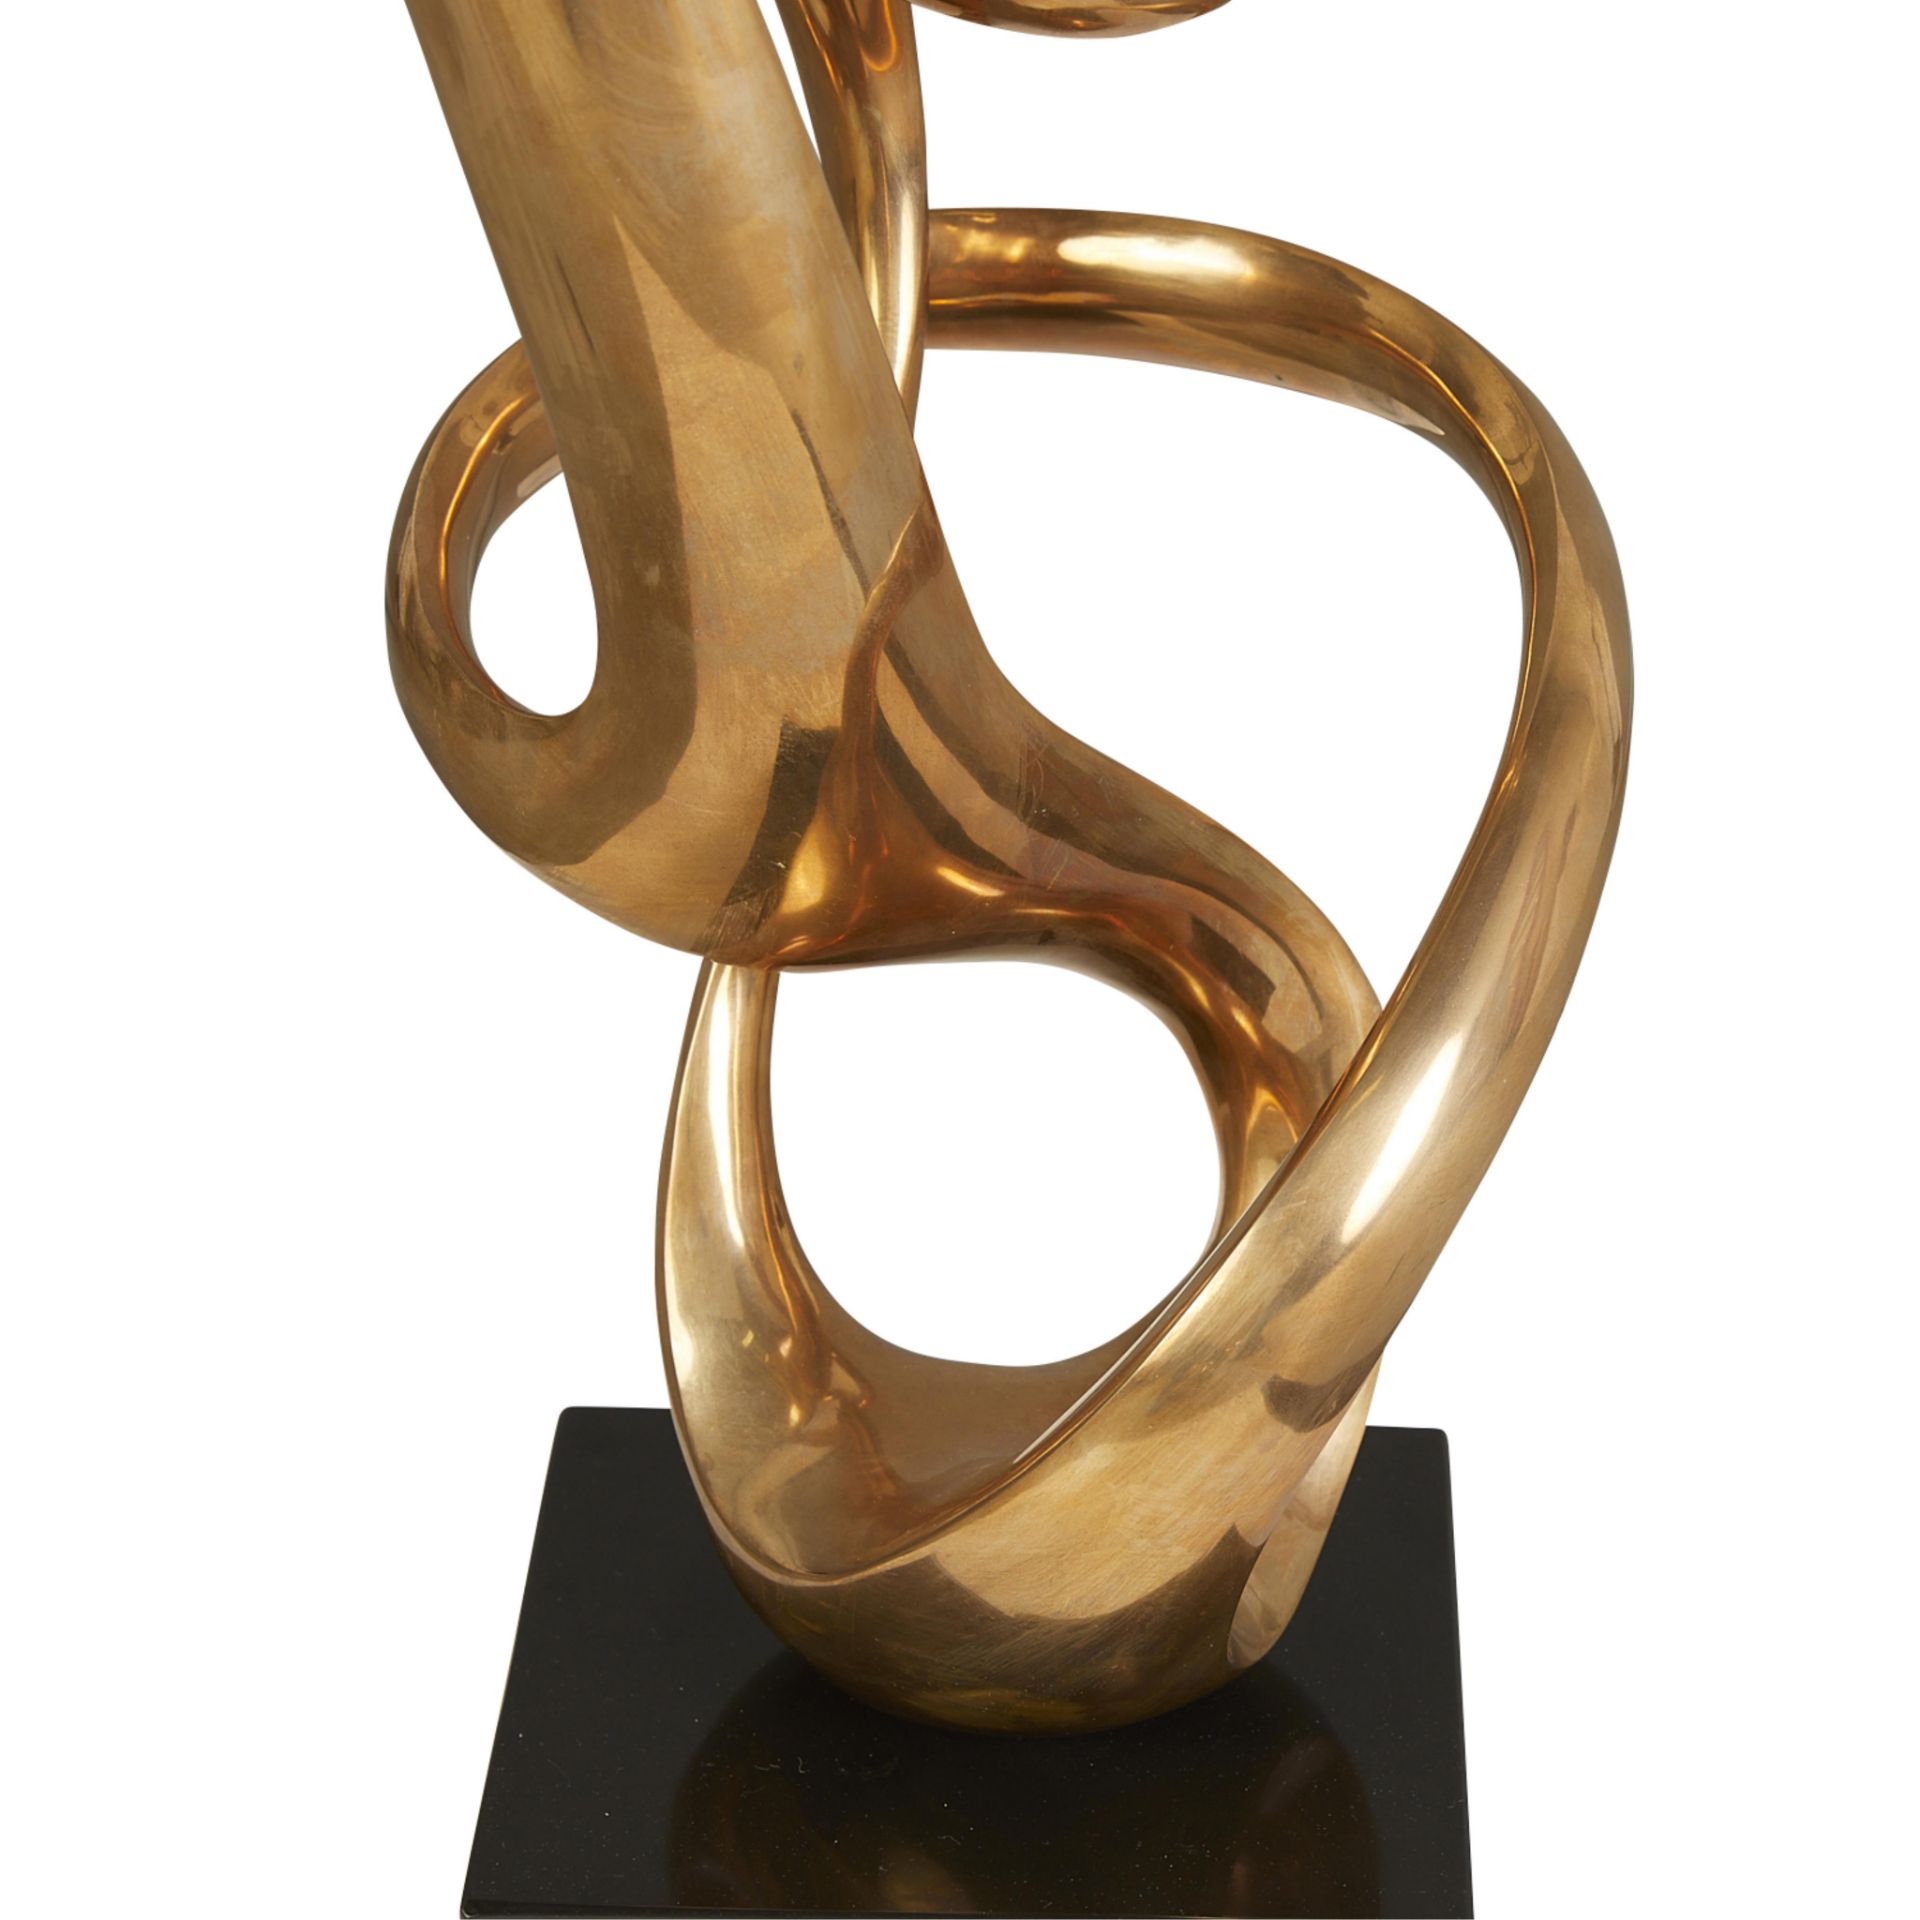 Kieff "Folklore 85 No. 26" Abstract Sculpture - Image 2 of 10